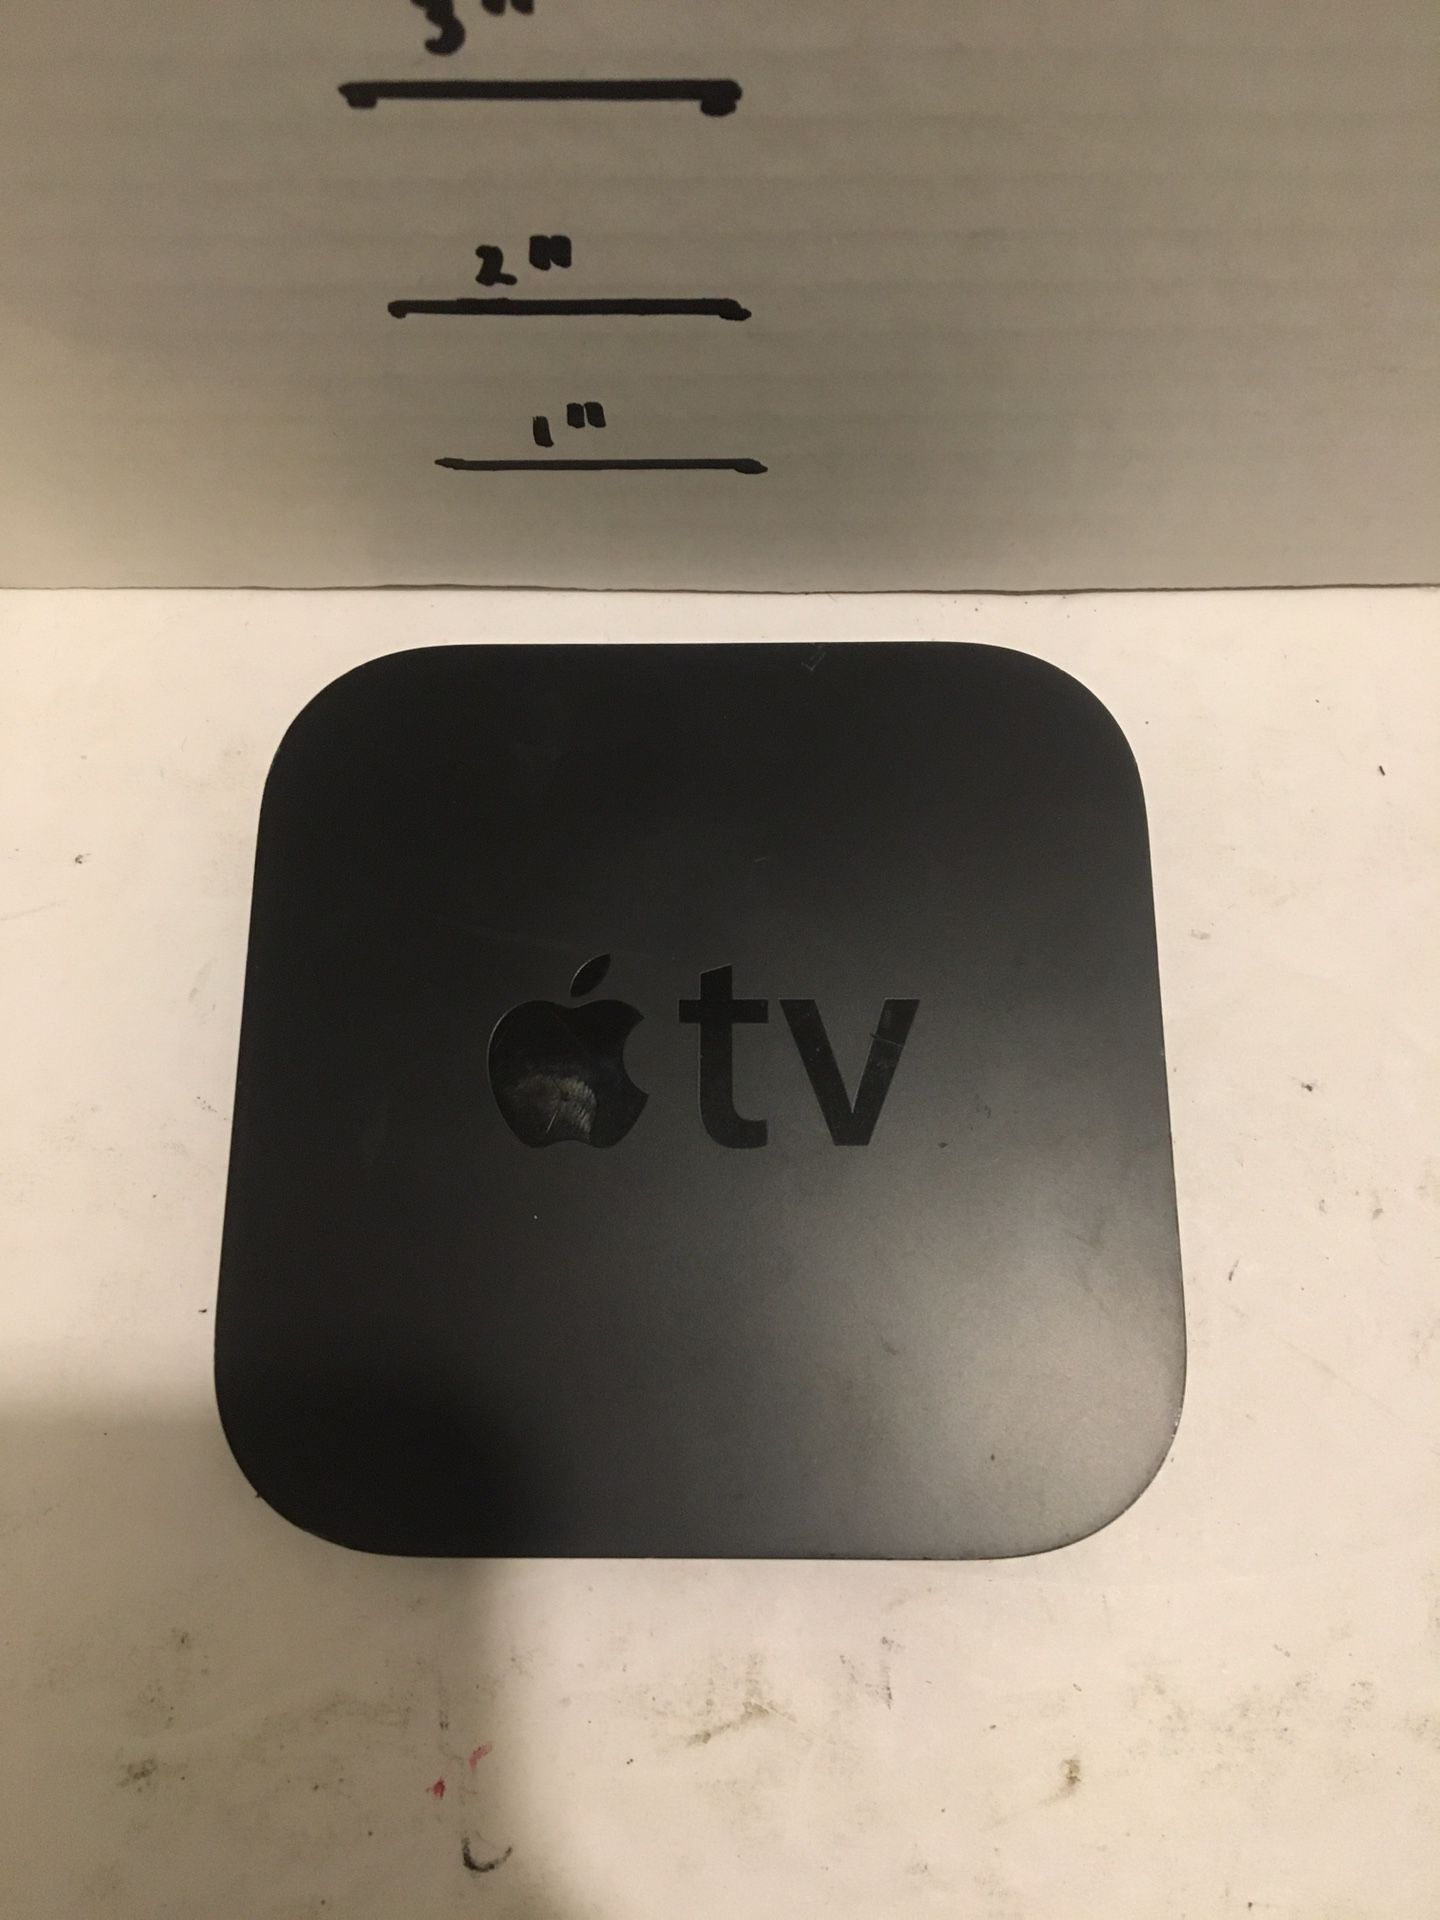 Apple TV streaming device model A1378 2nd generation